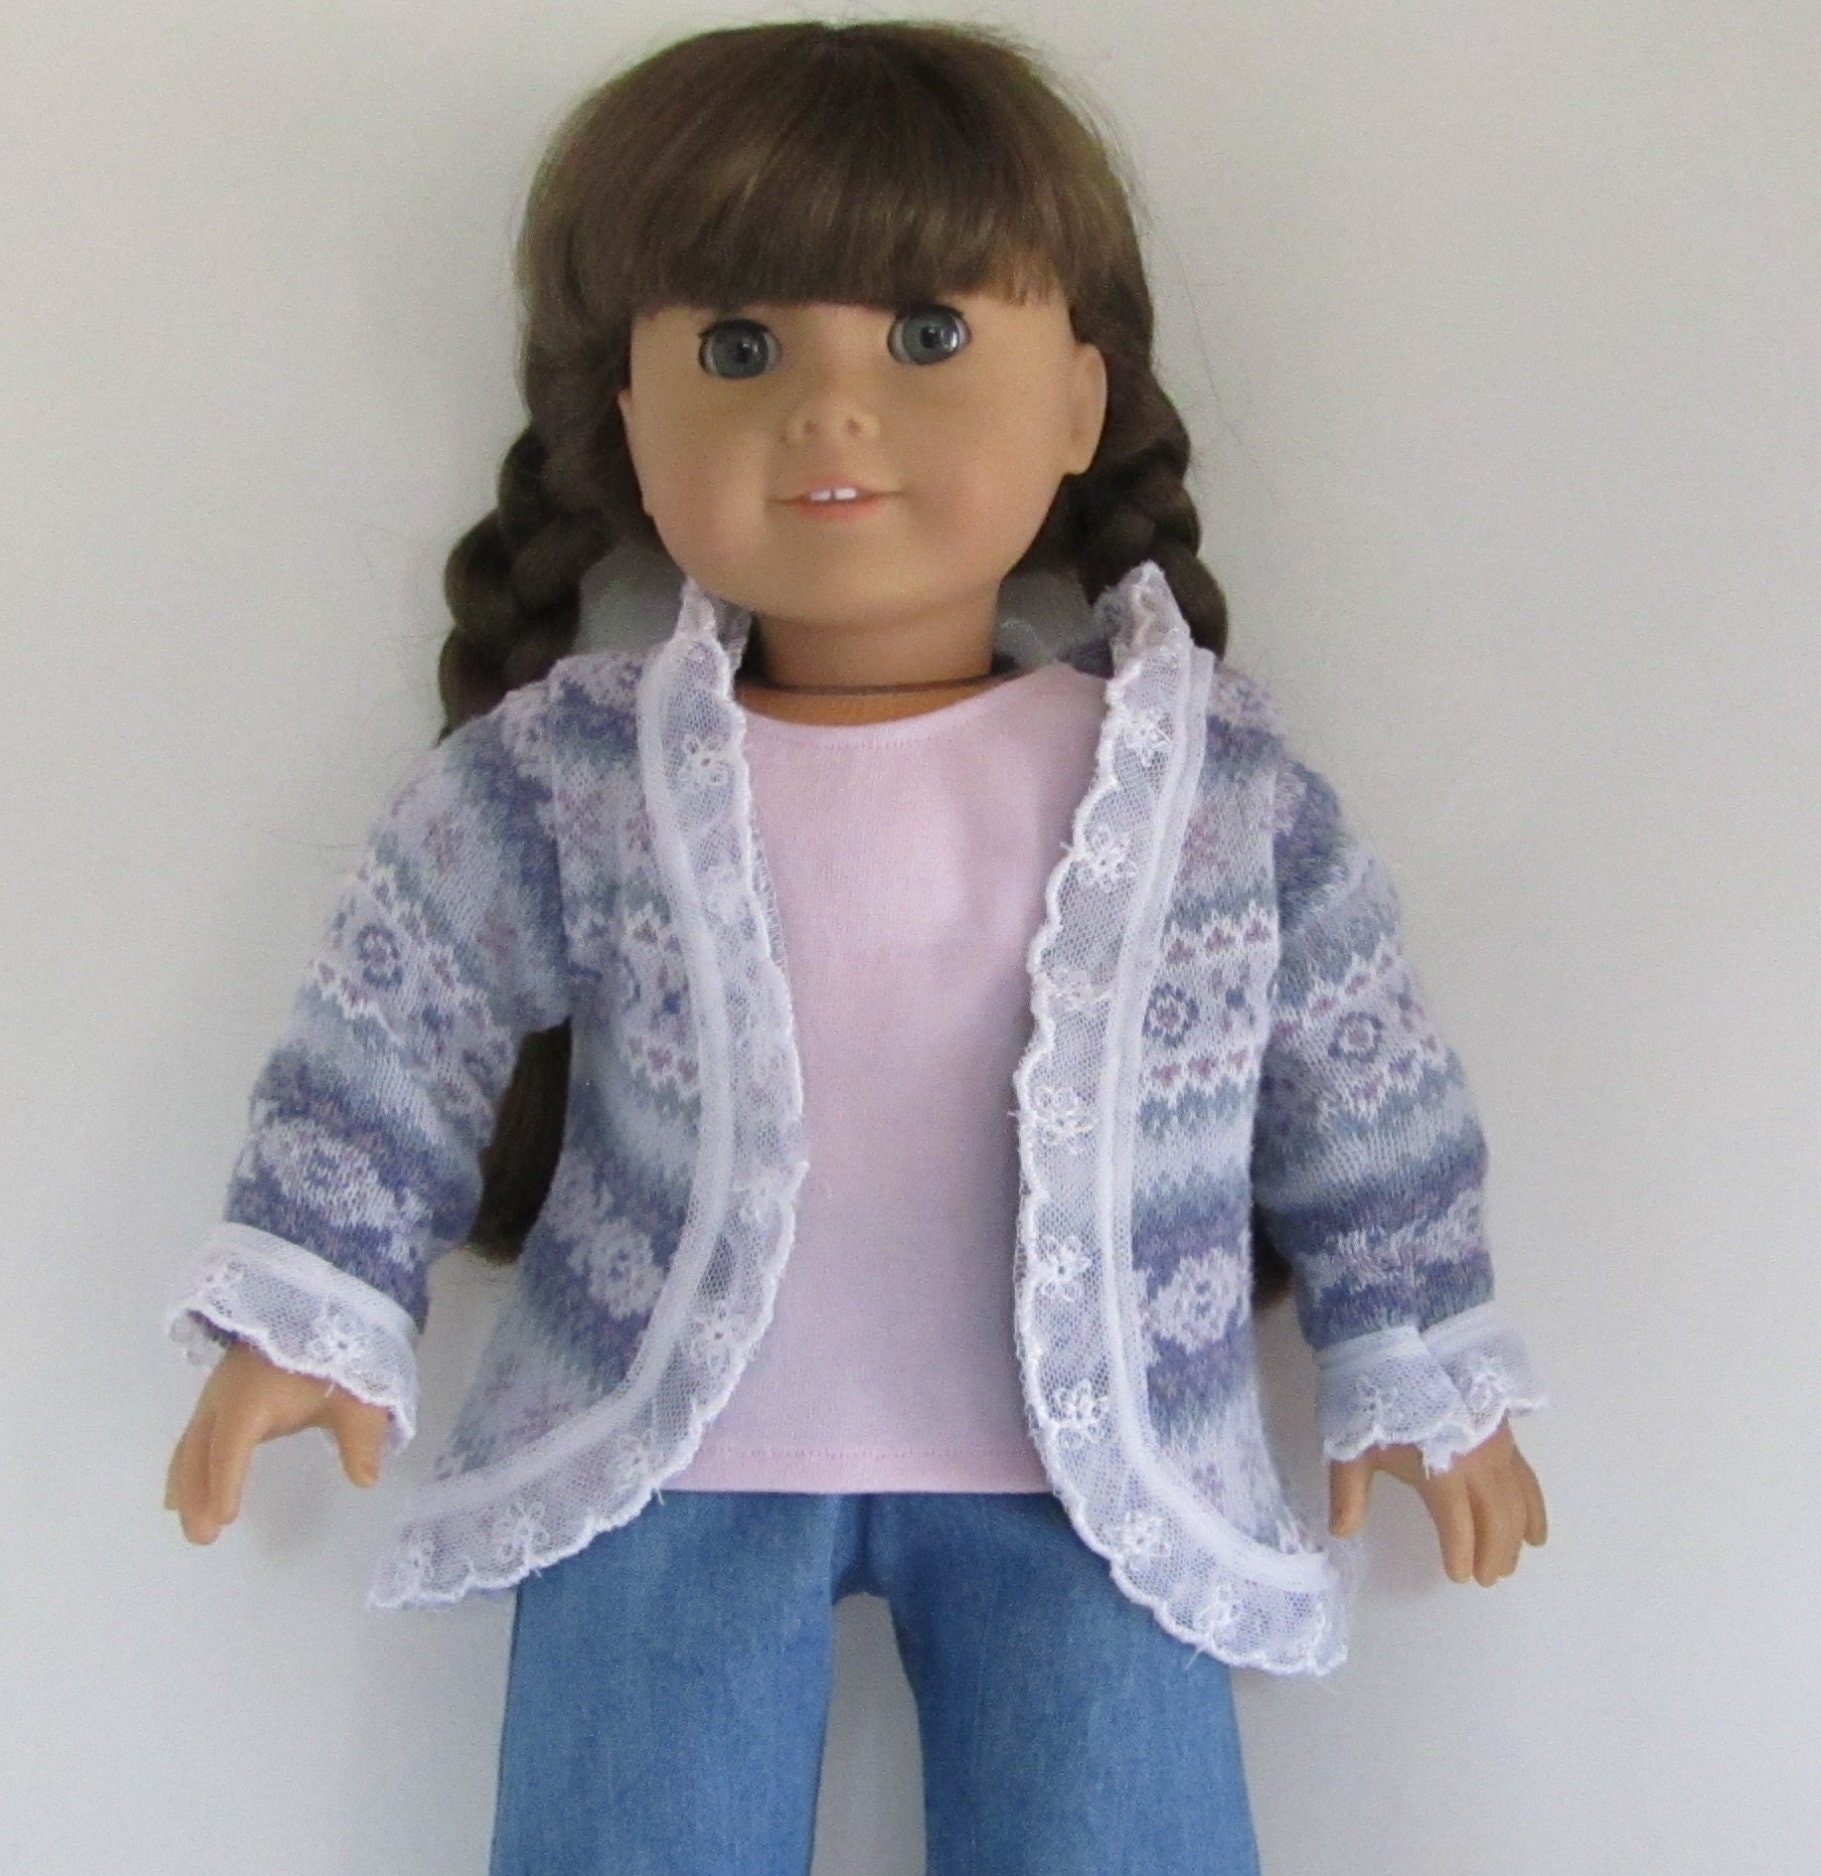 Purple Flowers Lace Trimmed Sweater Cardigan for 18 Inch Doll Like American  Girl or Similar Doll 